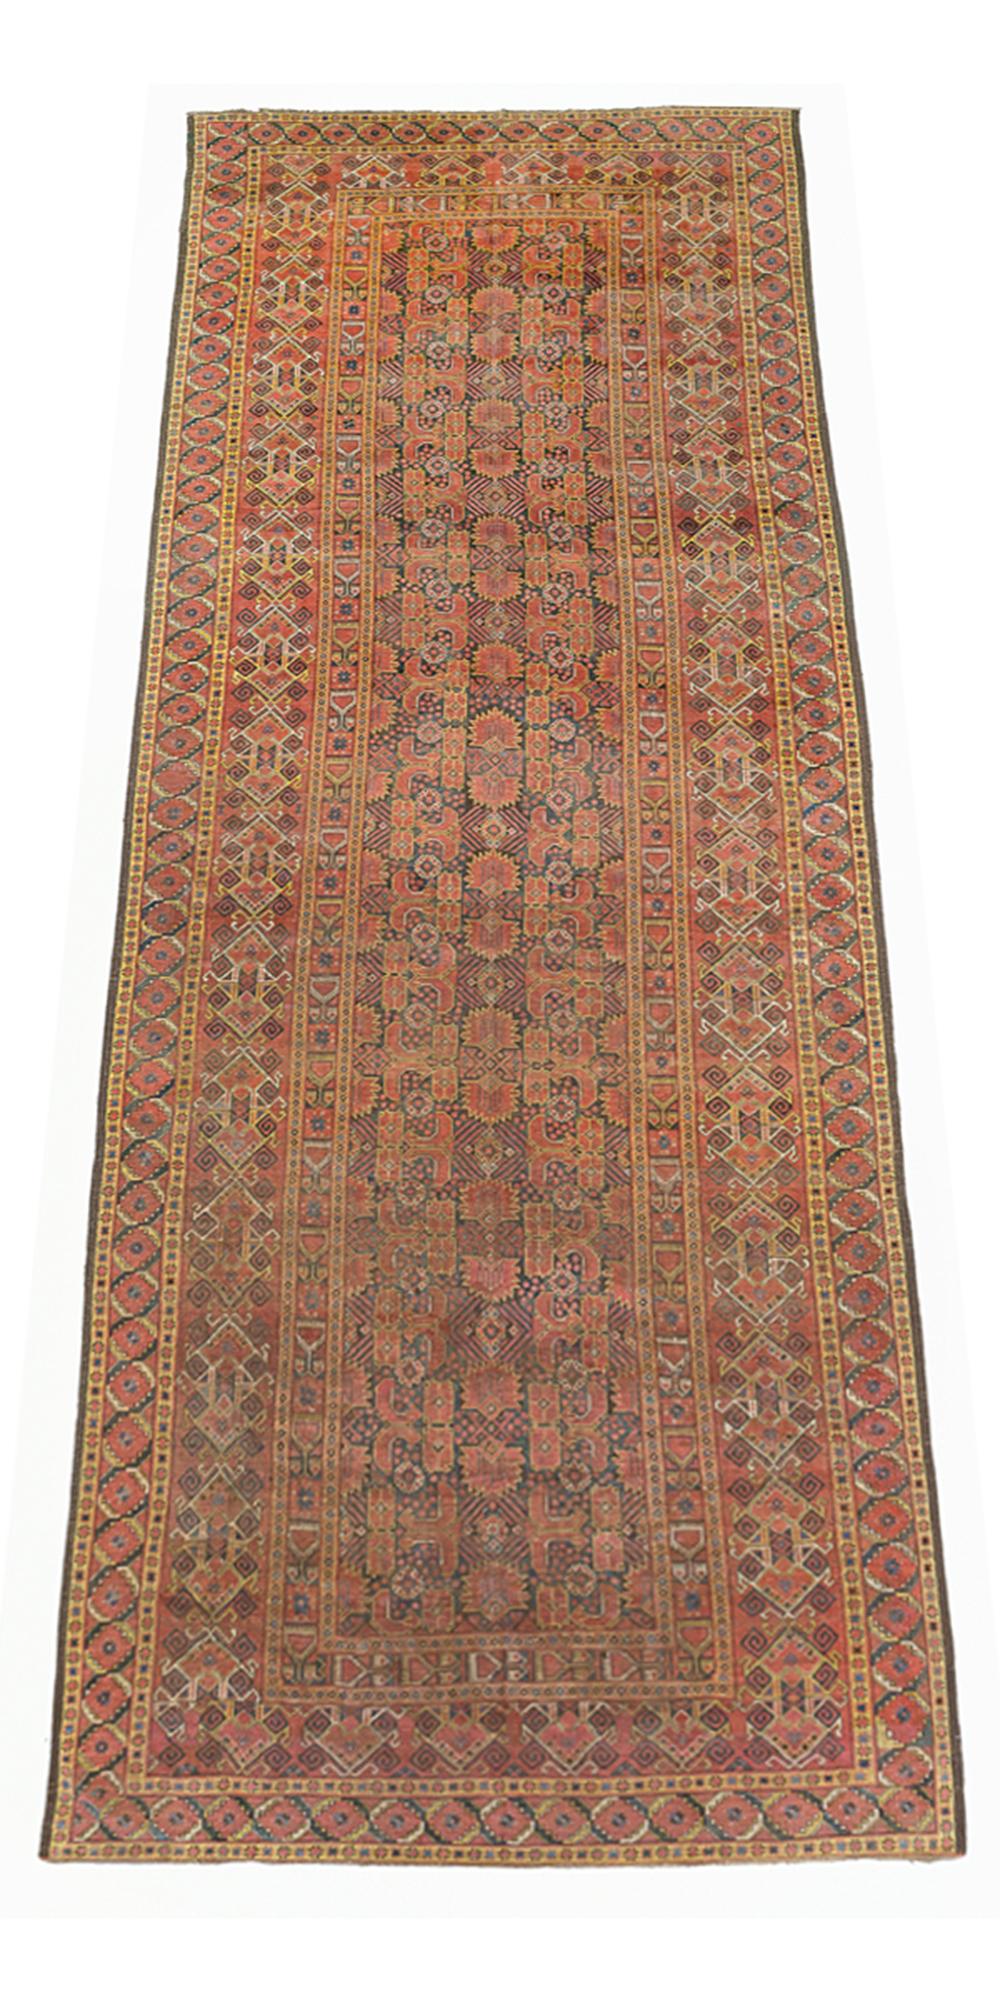 Antique Afghan rug handwoven from the finest sheep’s wool and colored with all-natural vegetable dyes that are safe for humans and pets. It’s a traditional Bashir design featuring a lovely reddish brown field covered with black and yellow mixed